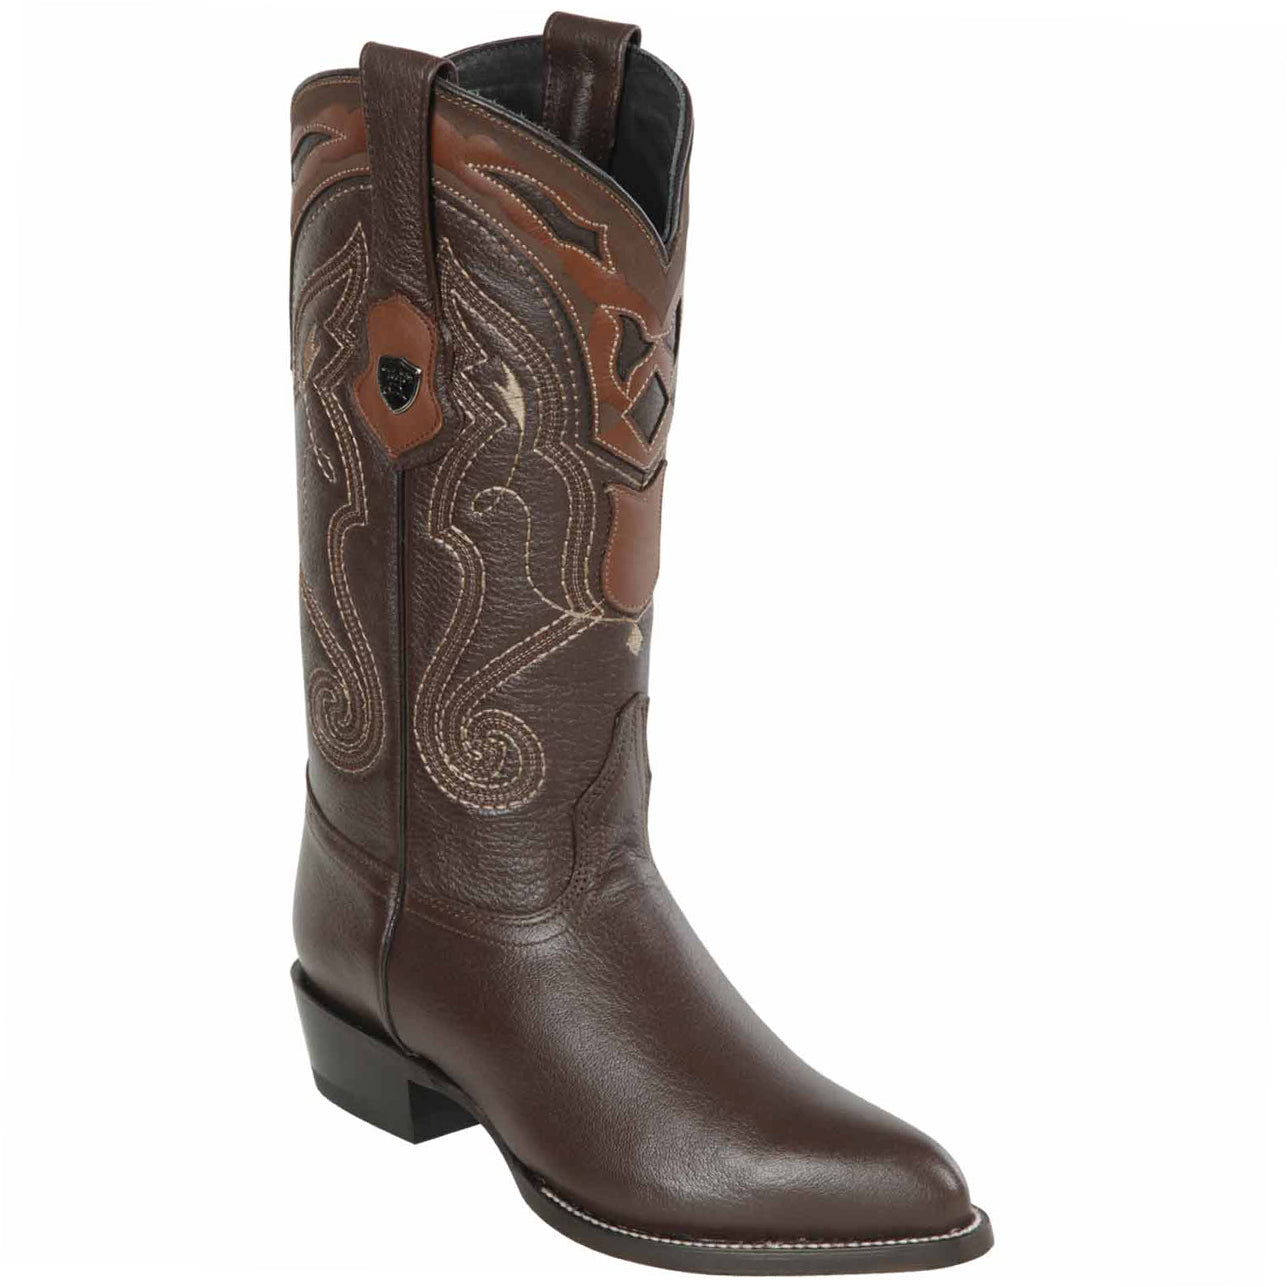 Wild West Boots - Deer Leather Brown Cowboy Boots